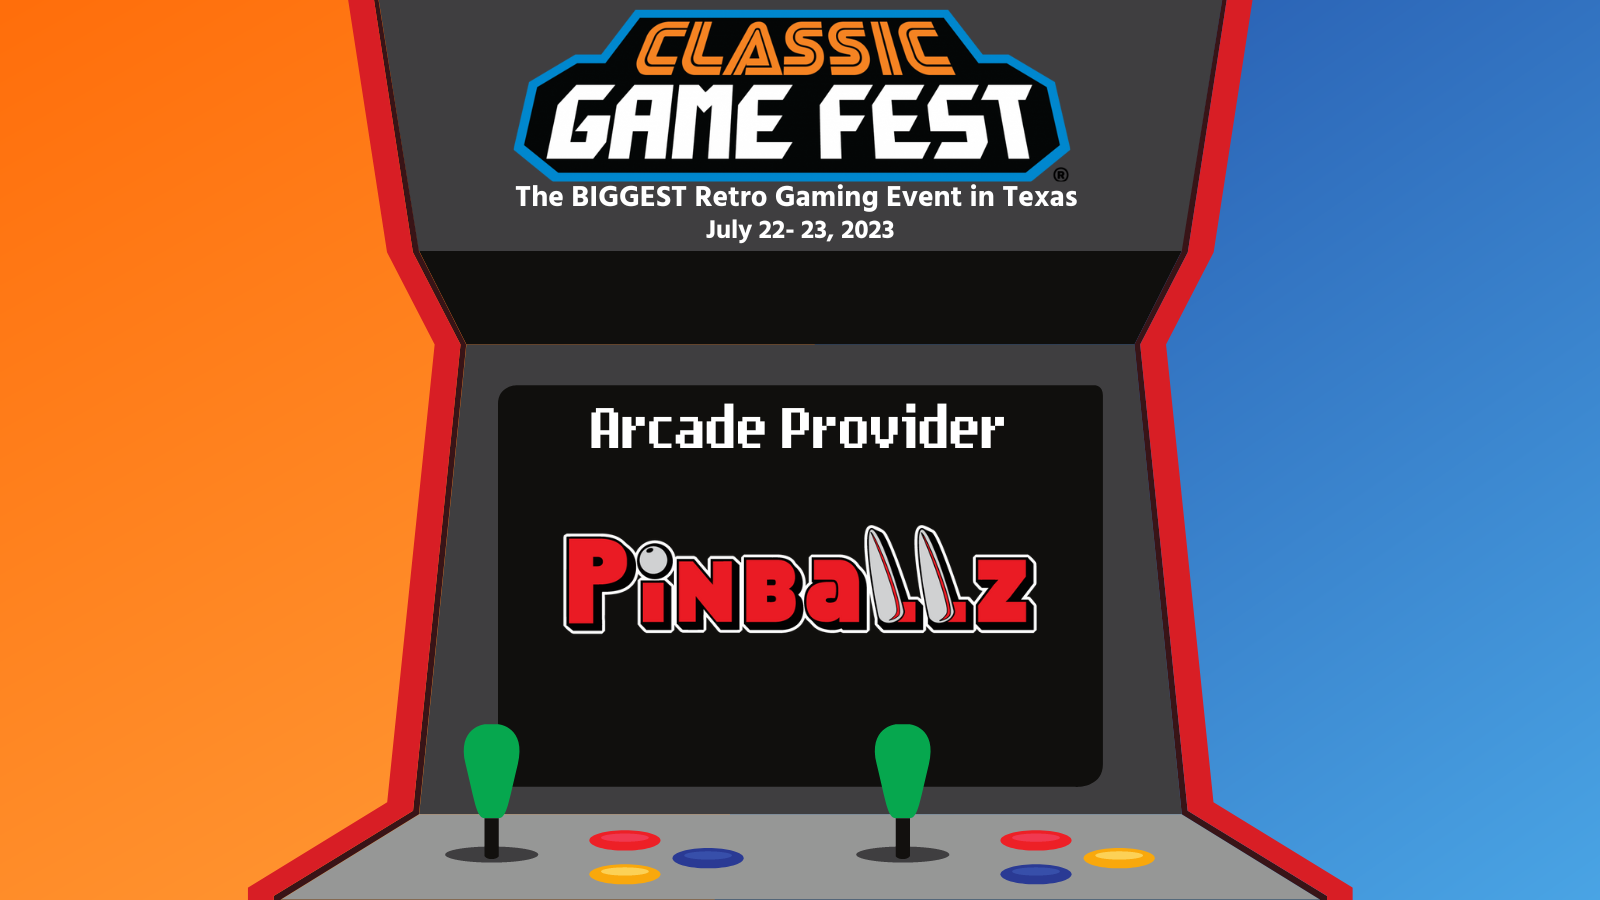 Guests Classic Game Fest